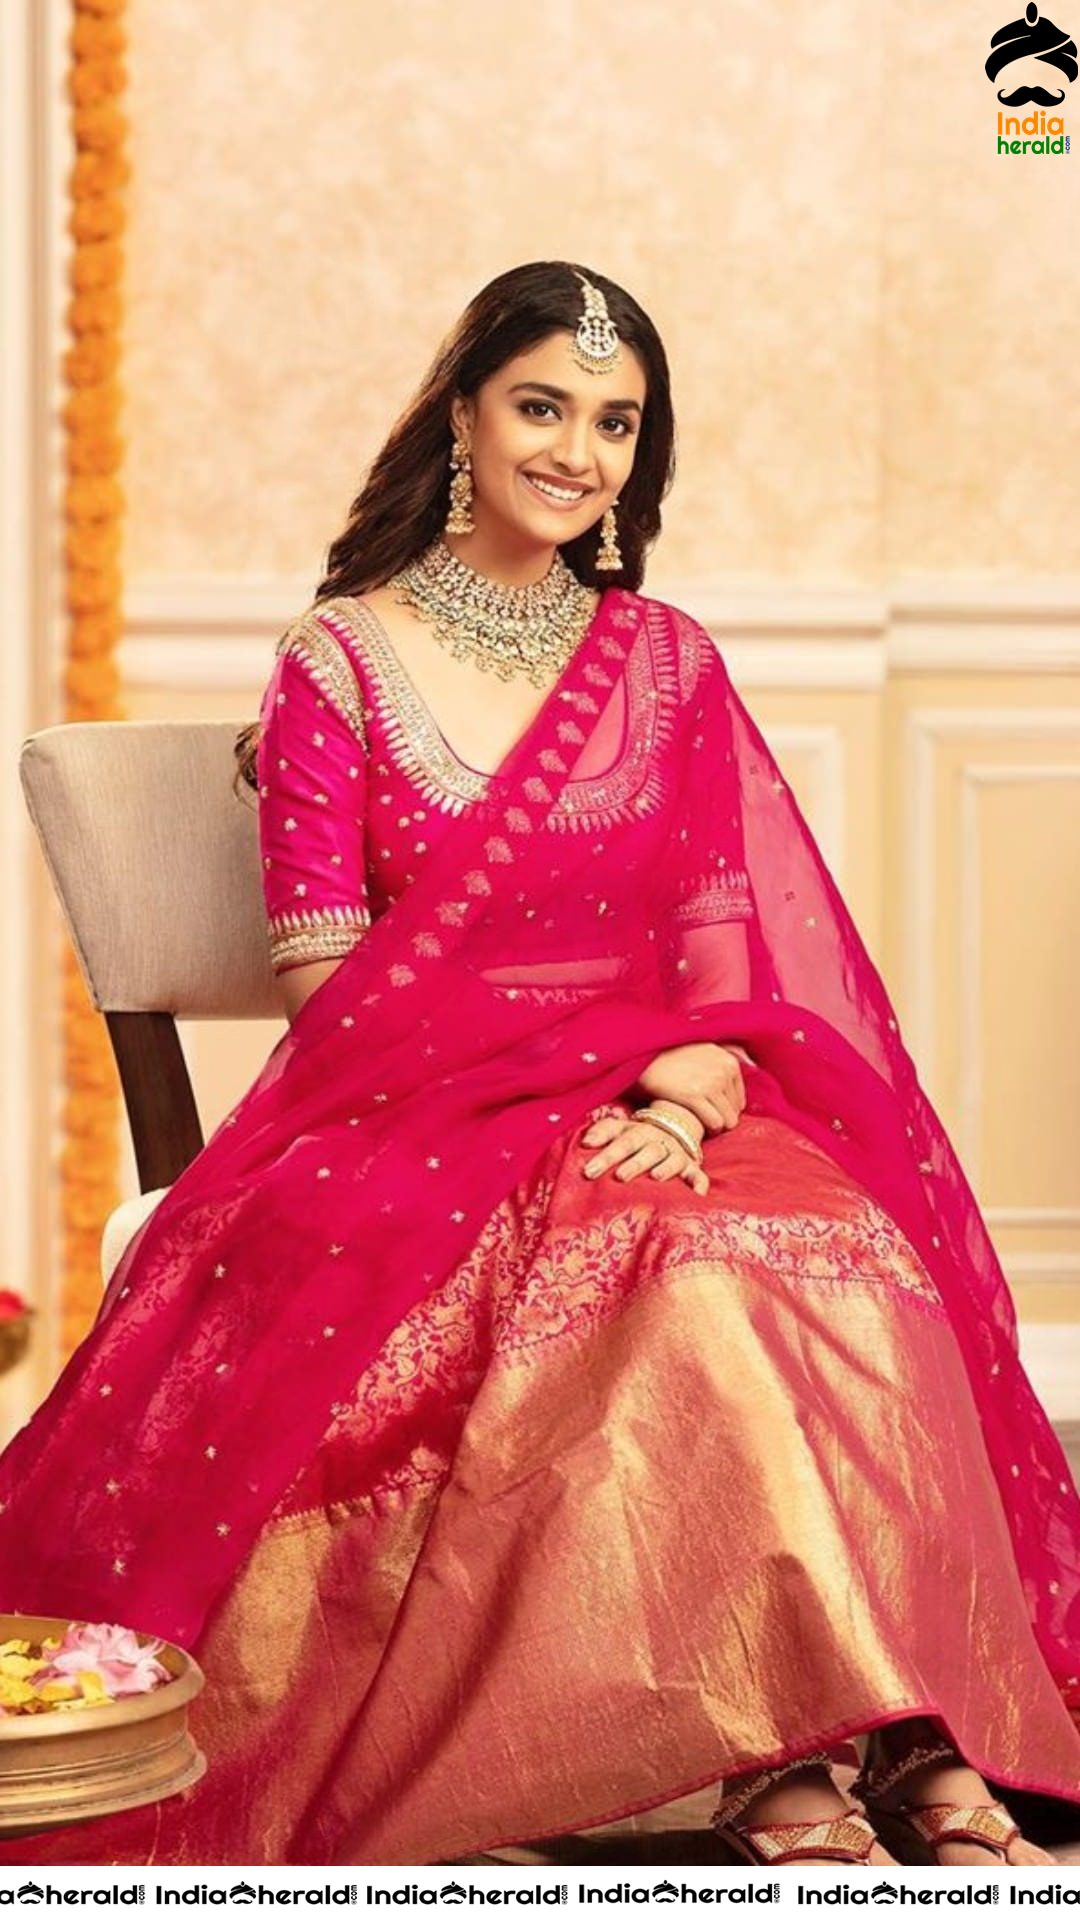 Lovely Clicks of Keerthy Suresh from her latest Advertisement